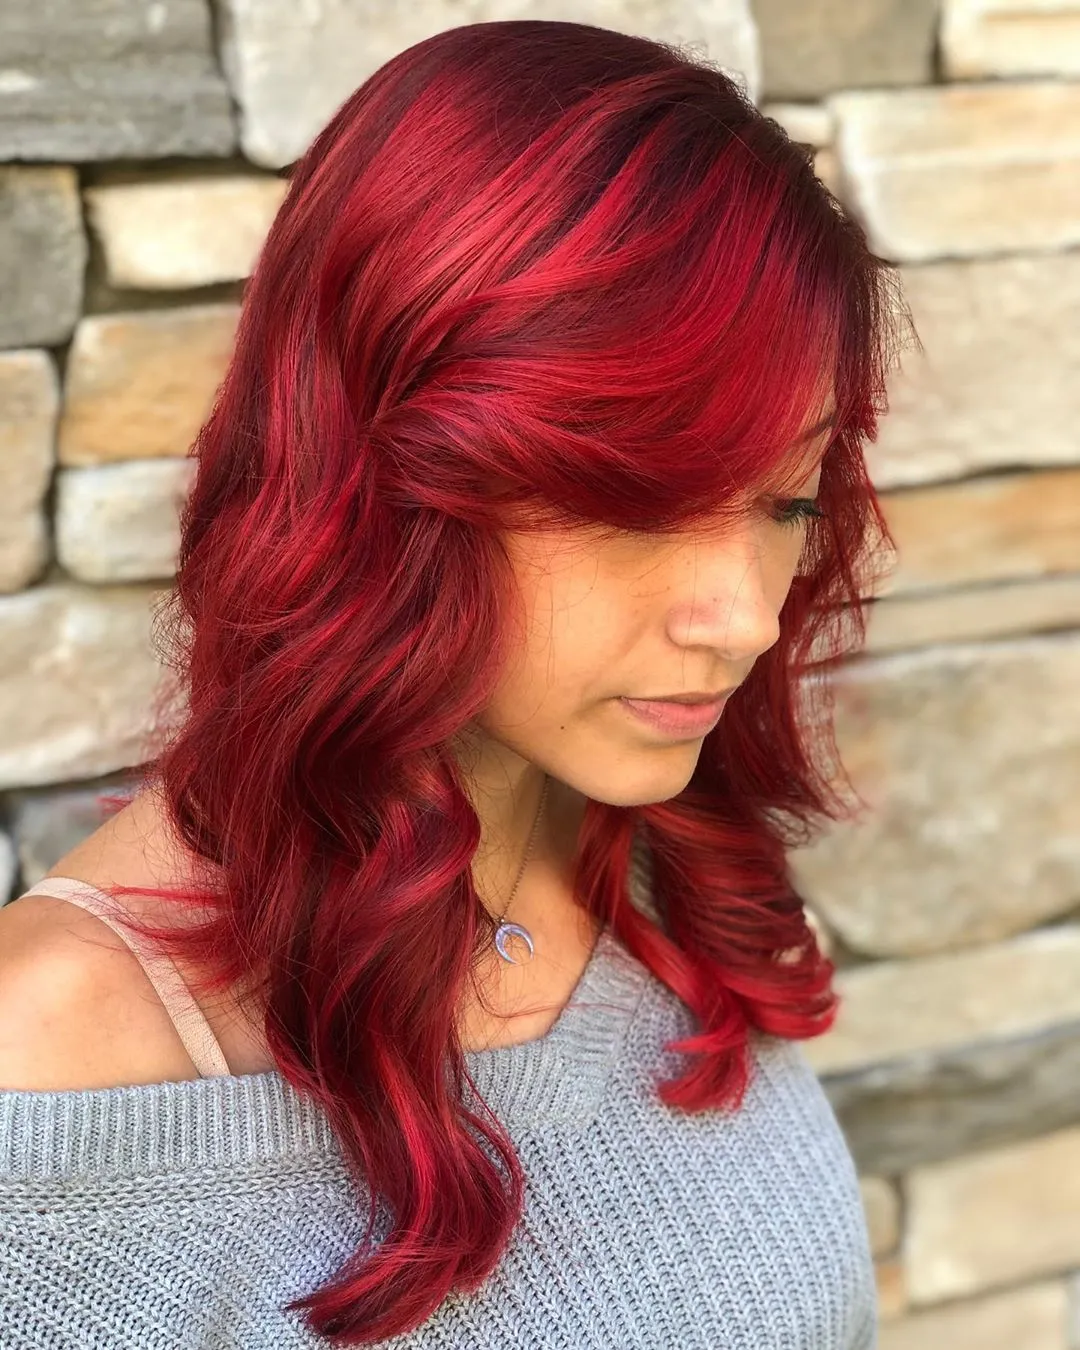 Bright Red Hair Color girl